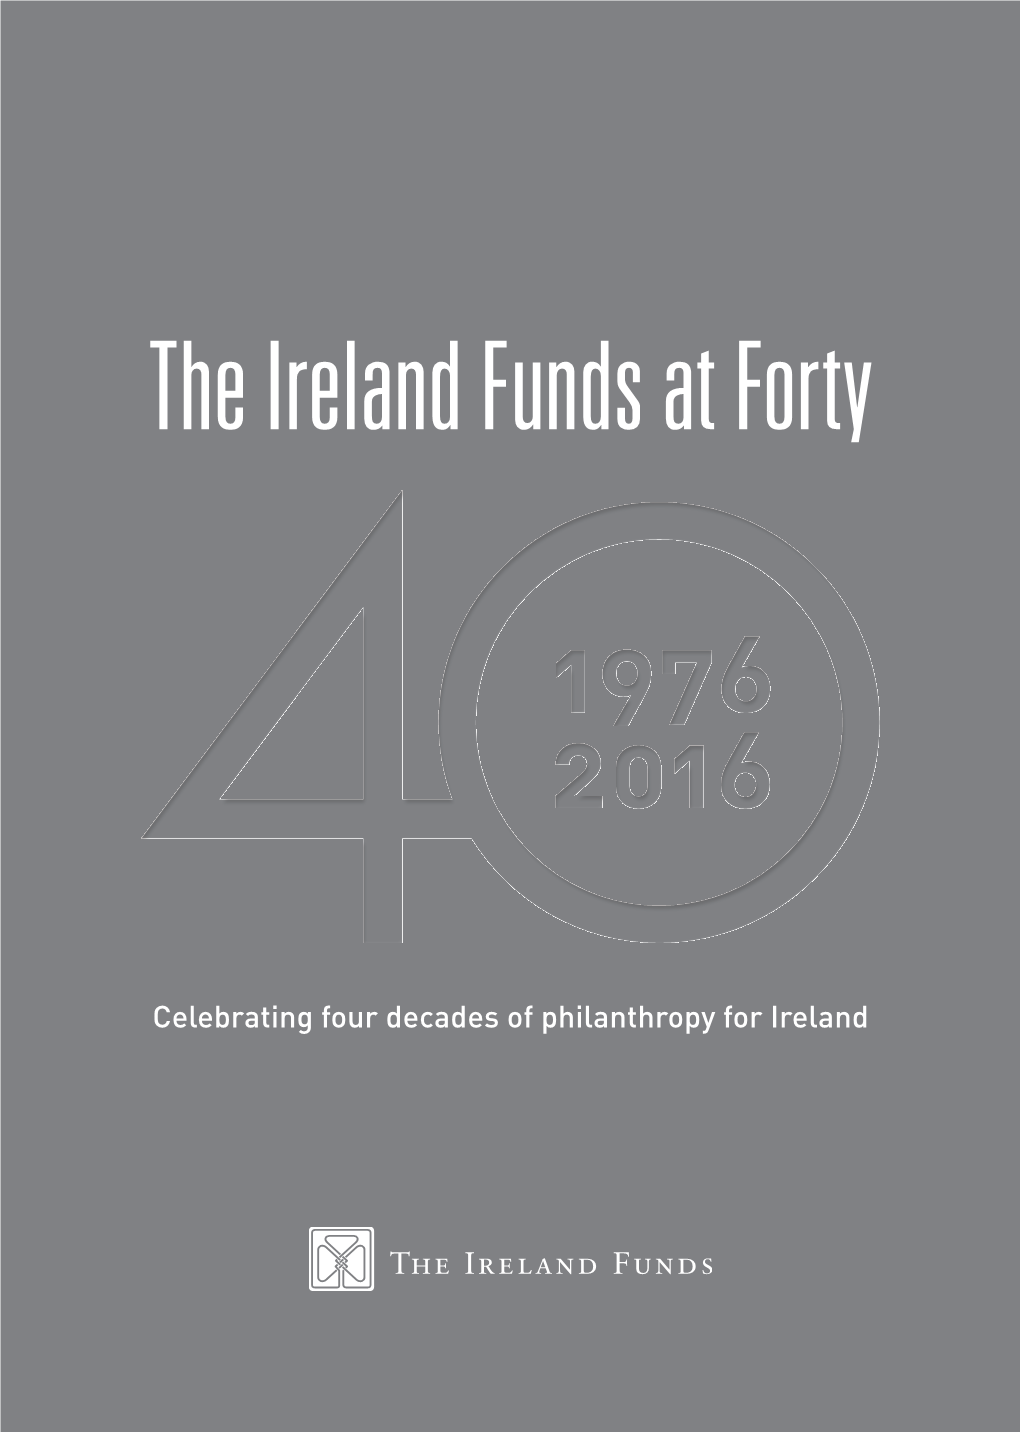 The Ireland Funds at Forty